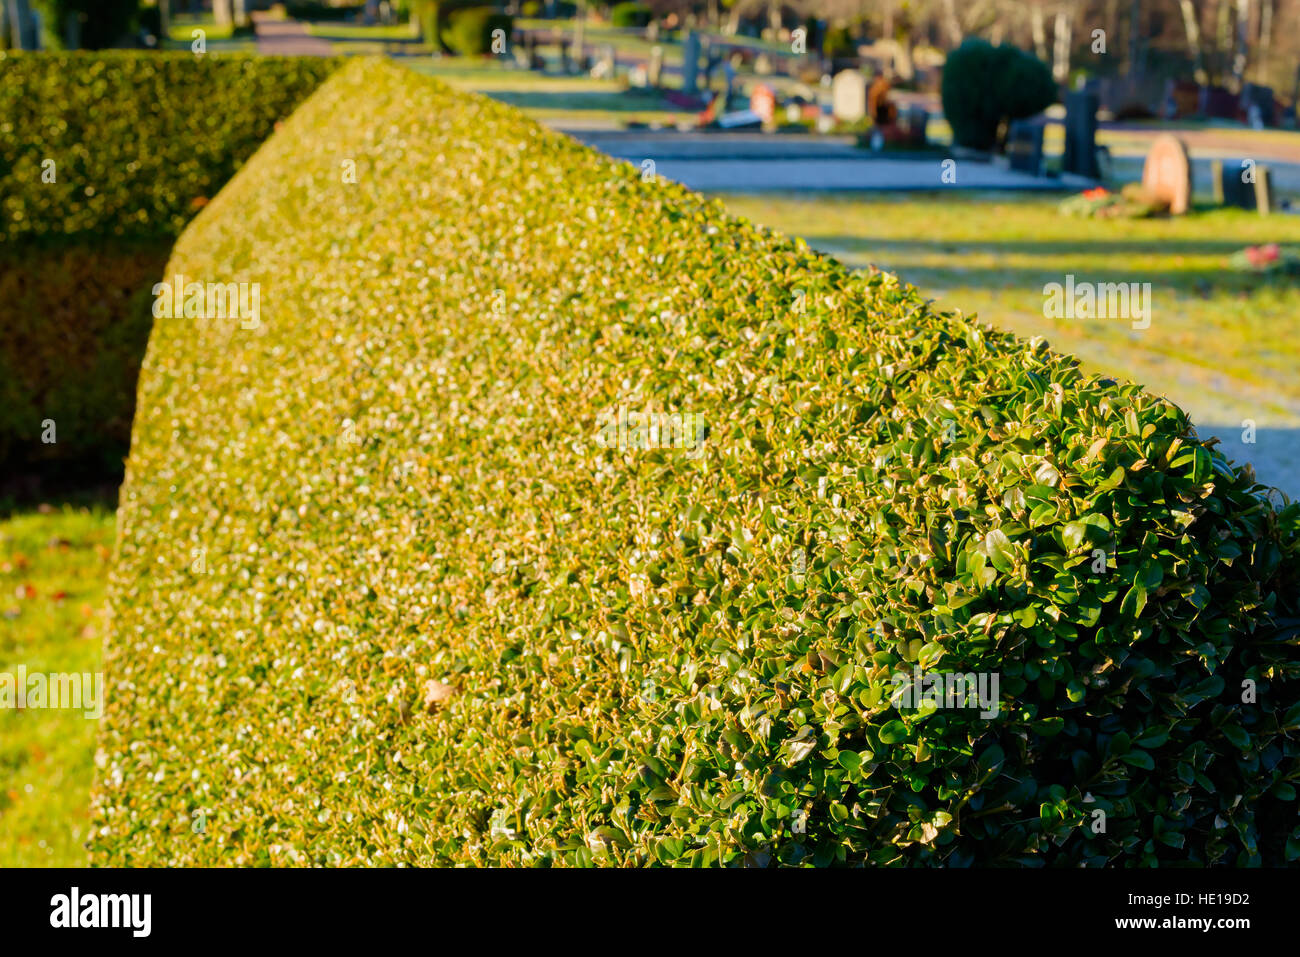 Evergreen common box (Buxus sempervirens) at cemetery. Here used as an ornamental hedge. Shallow focus and blur in distance. Stock Photo